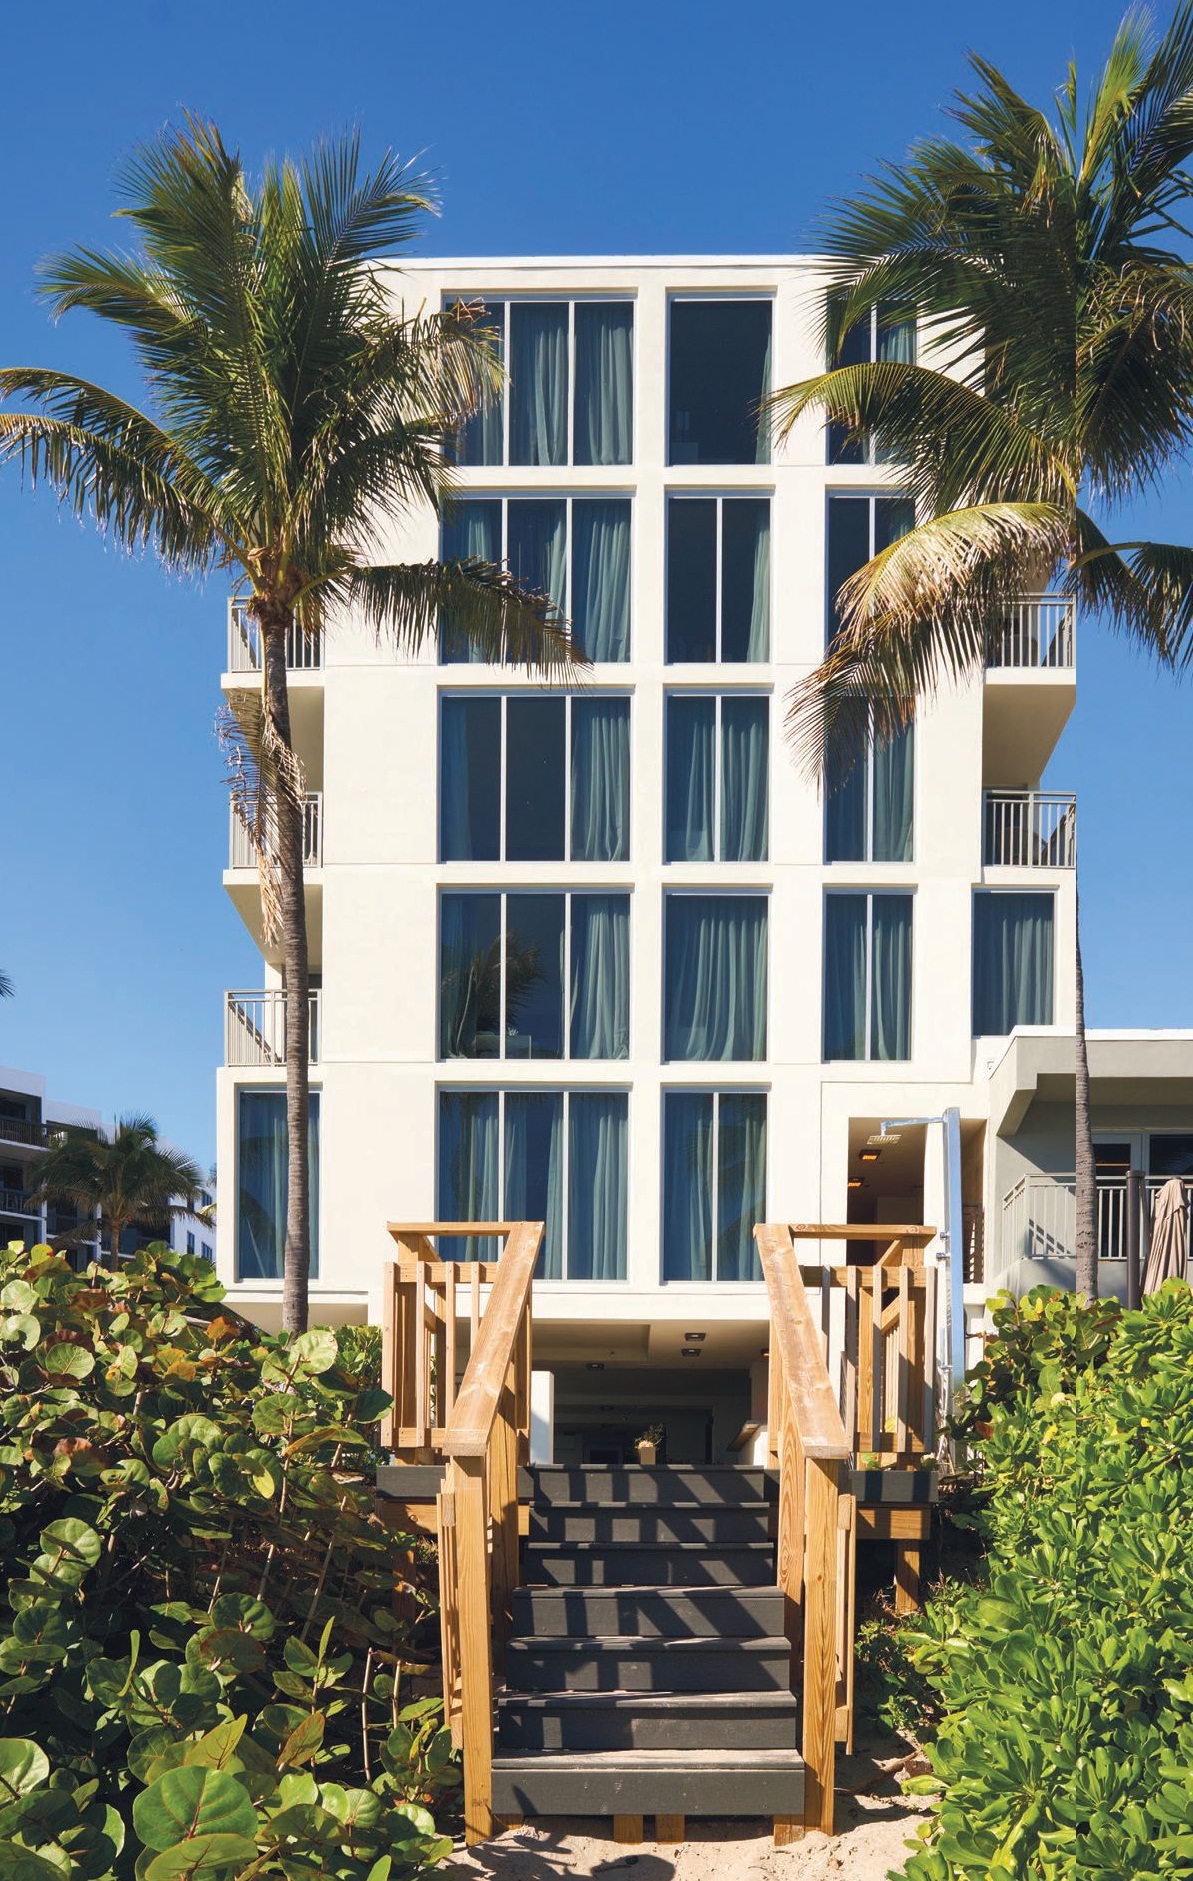 The boutique hotel has 72 guest rooms and suites, many with ocean views. PHOTO COURTESY OF HILLSBORO BEACH RESORT